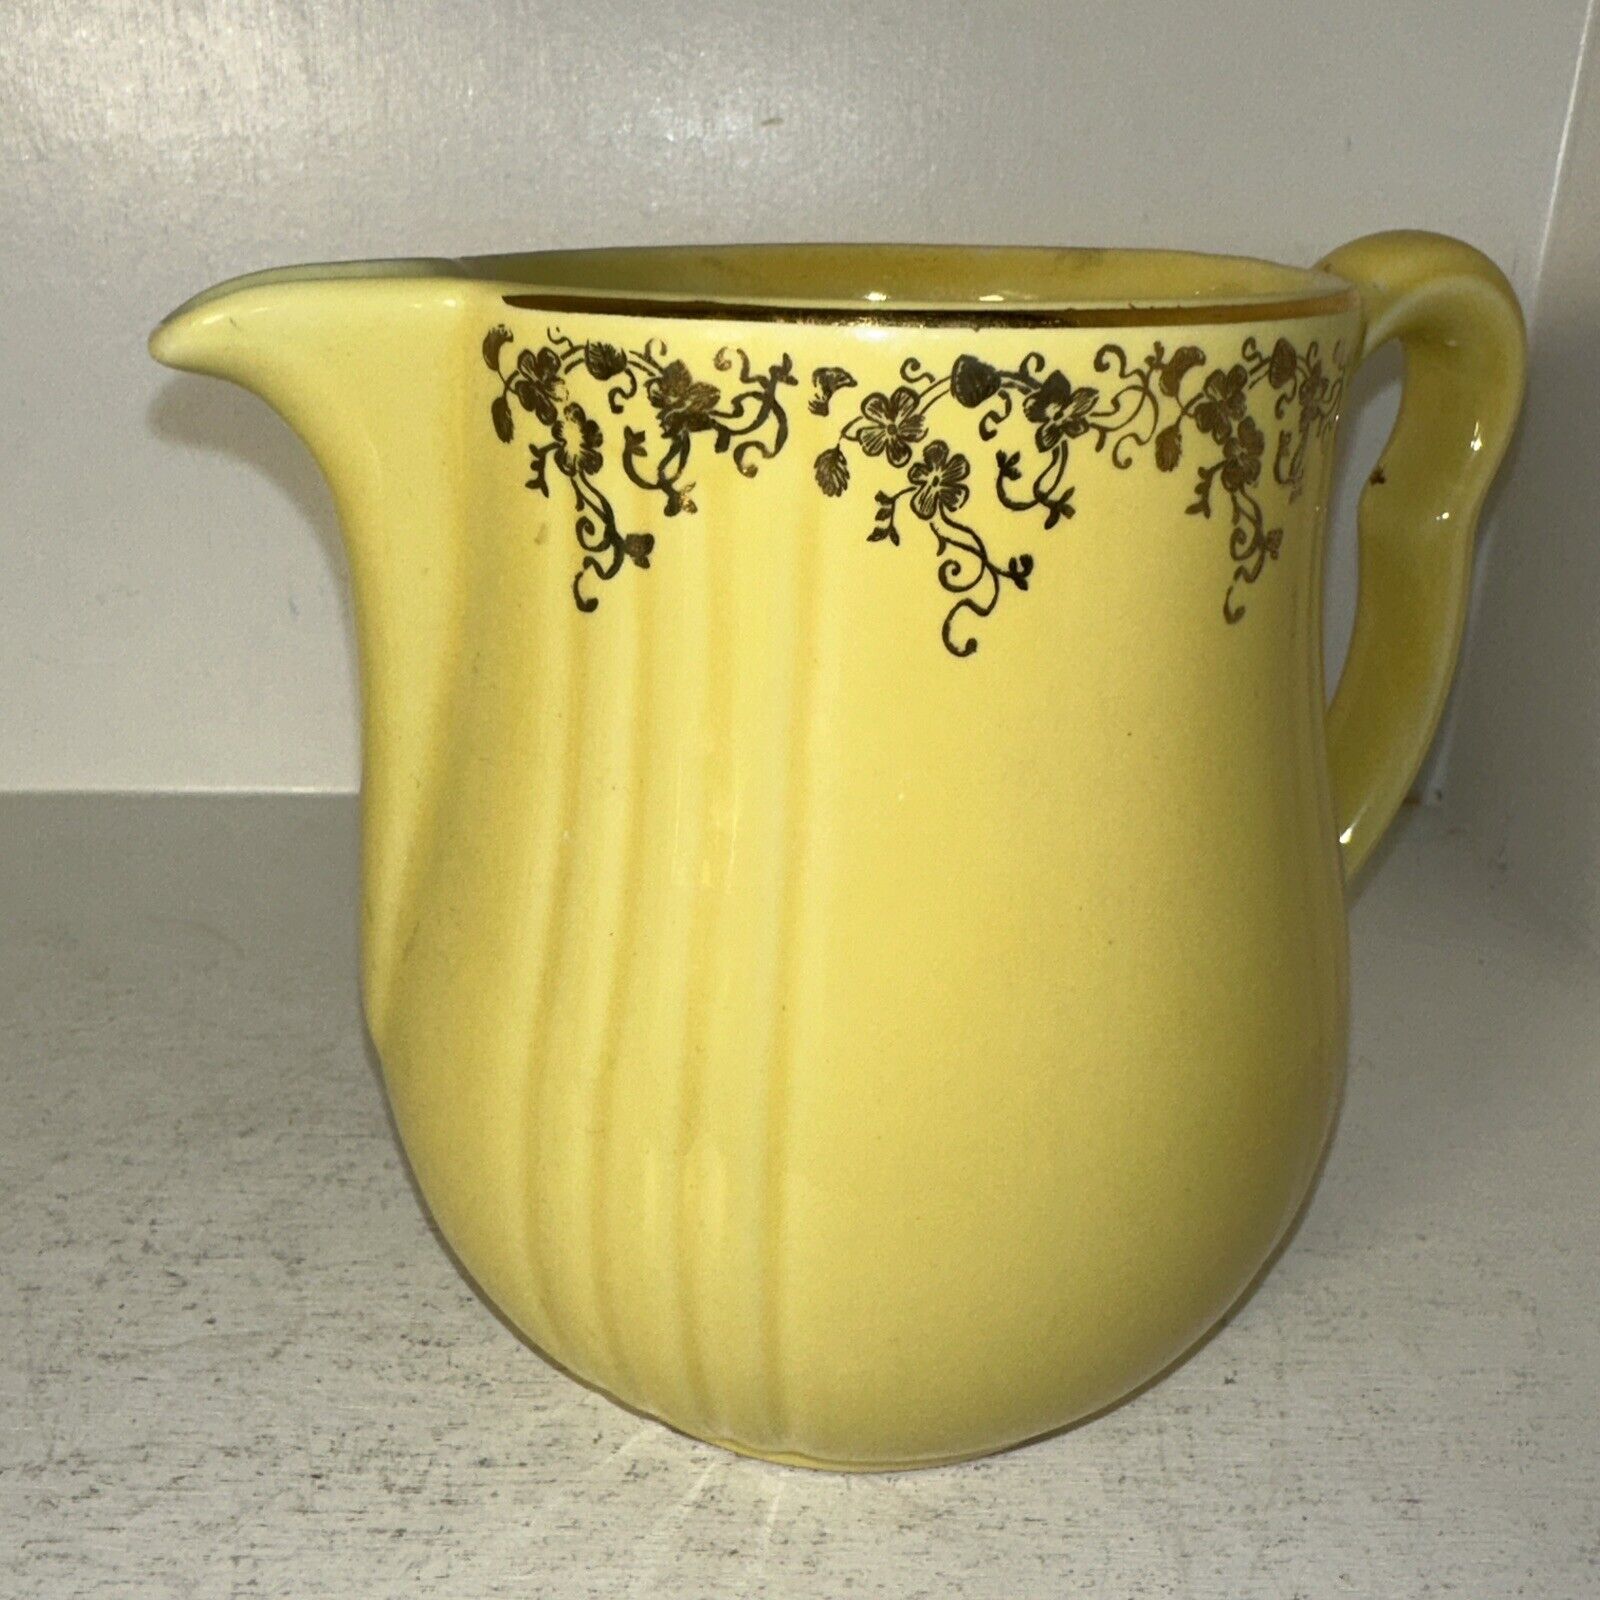 Vintage Hall China Yellow Jug Pitcher with Gold Design